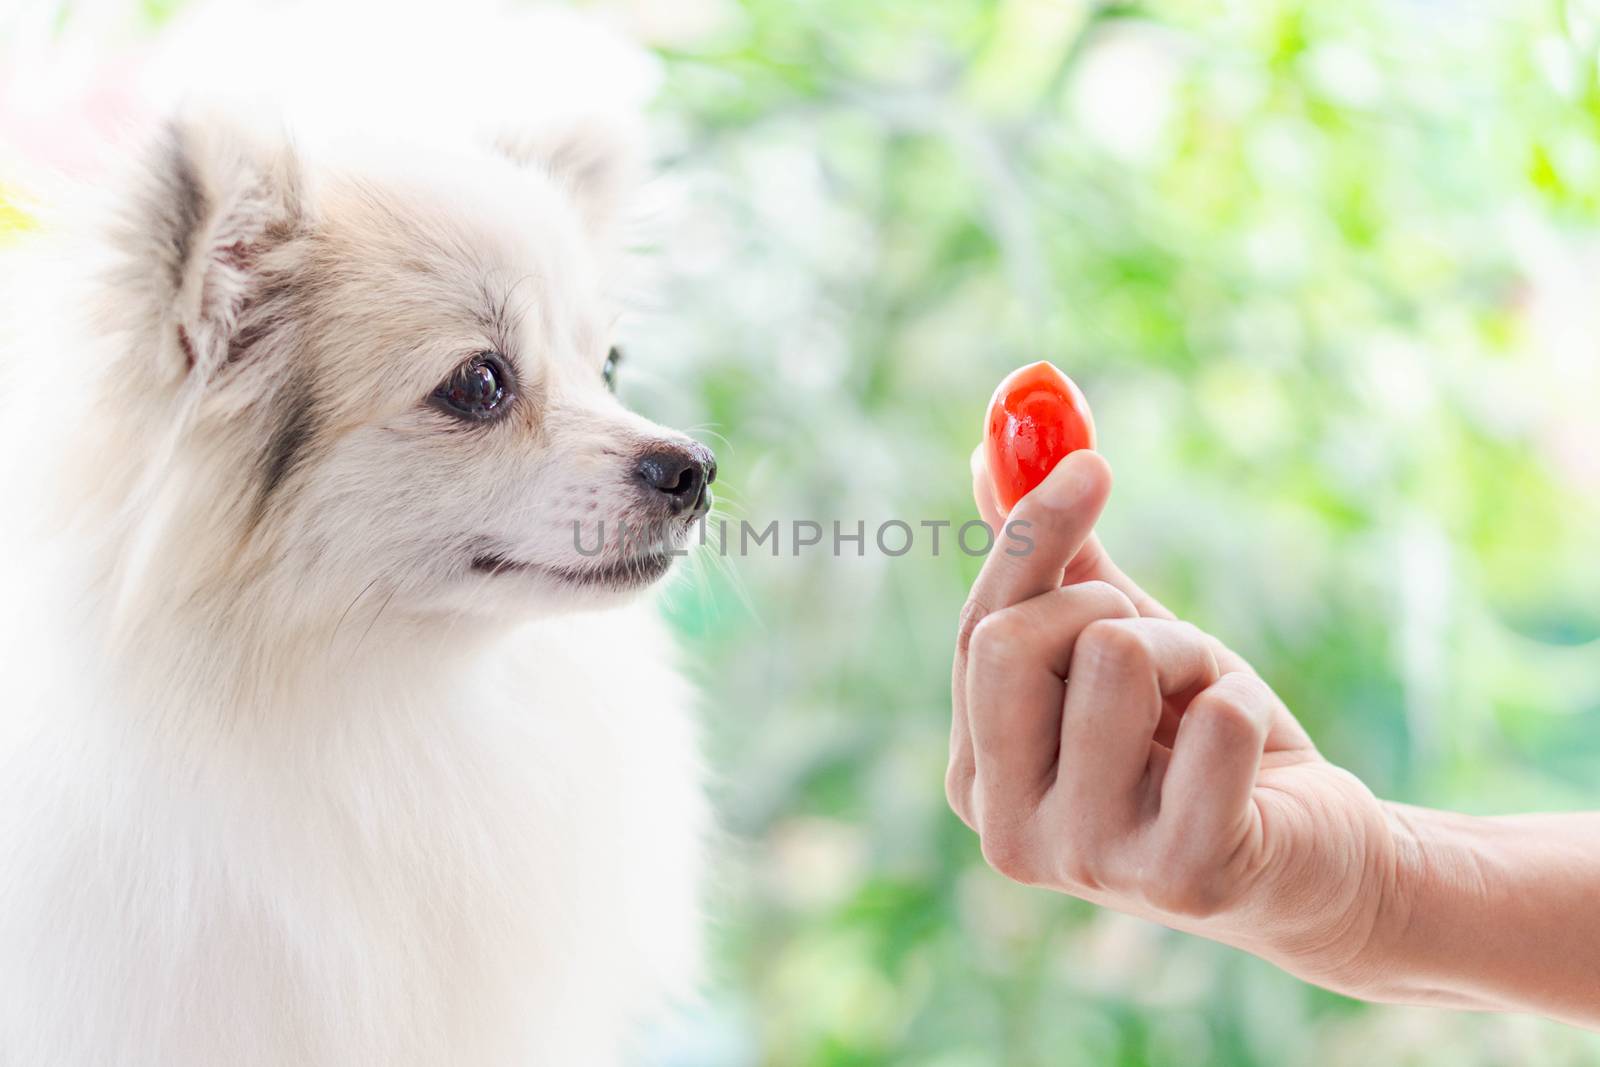 Closeup cute pomeranian dog looking red cherry tomato in hand with happy moment, selective focus